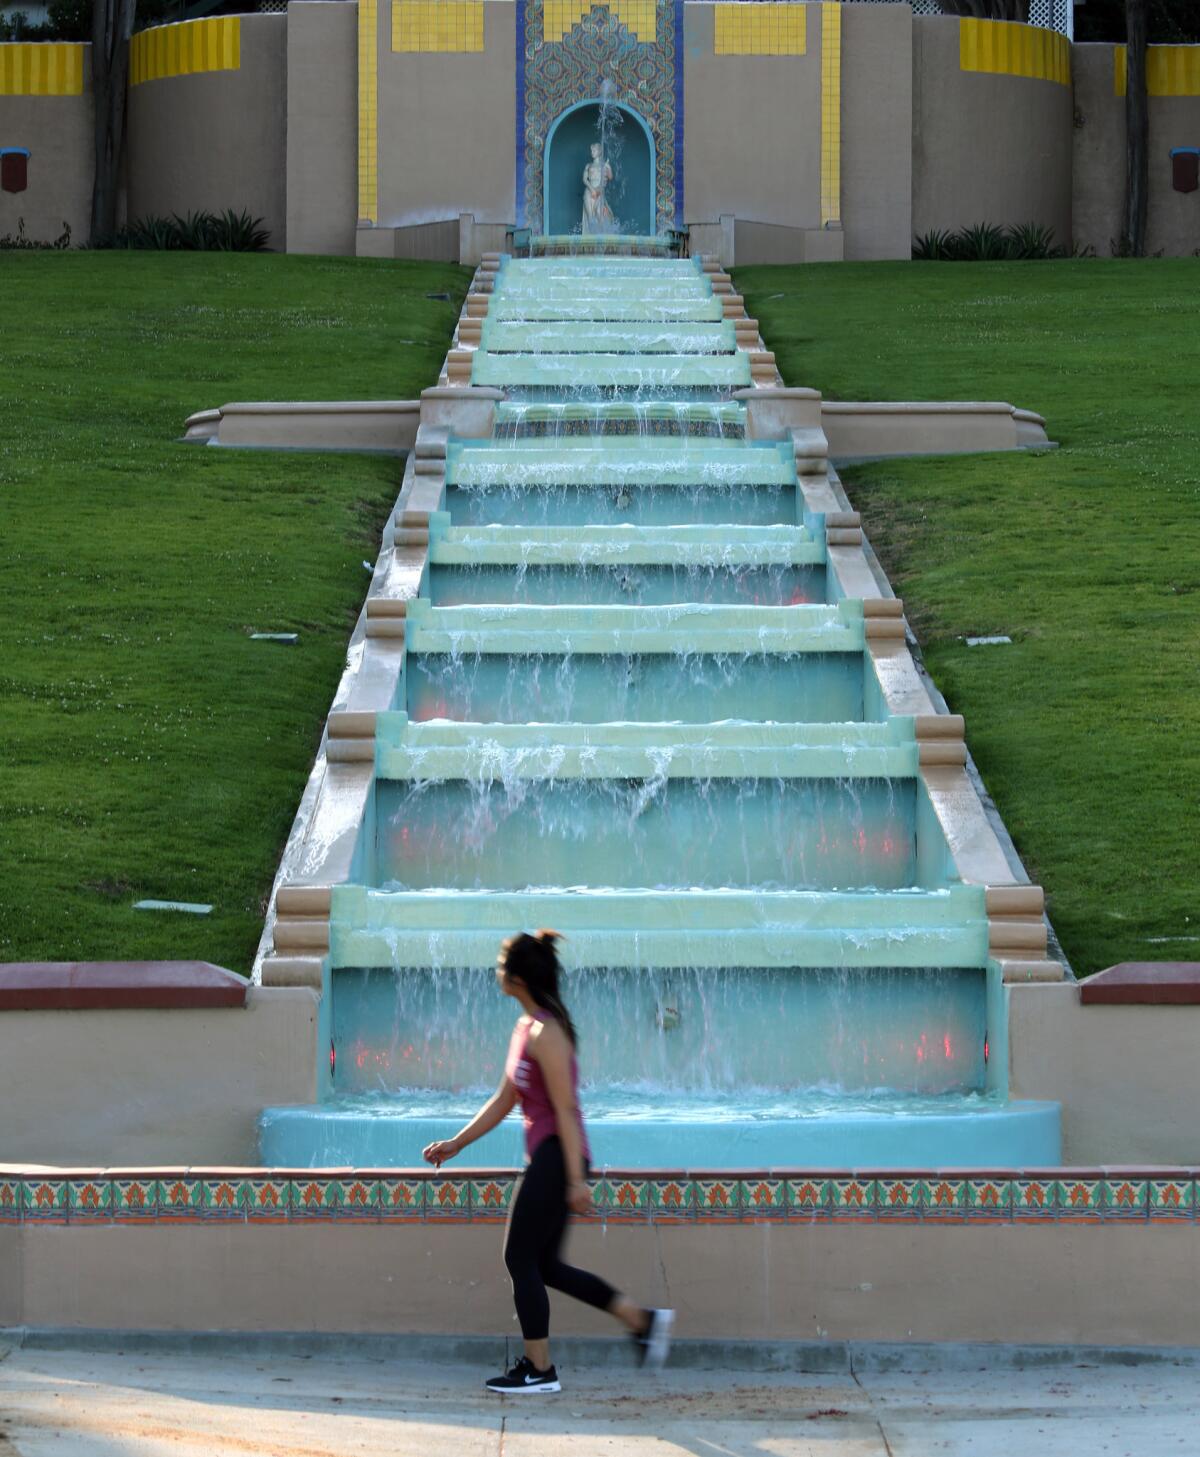 The multi-tiered fountain and the Athena statue that tops it are nostalgic reminders of the city's grand past, when a Greek developer named Peter Snyder decided to build Midwick View Estates, a luxury community of Spanish and Mediterranean style homes. (Glenn Koenig / Los Angeles Times)